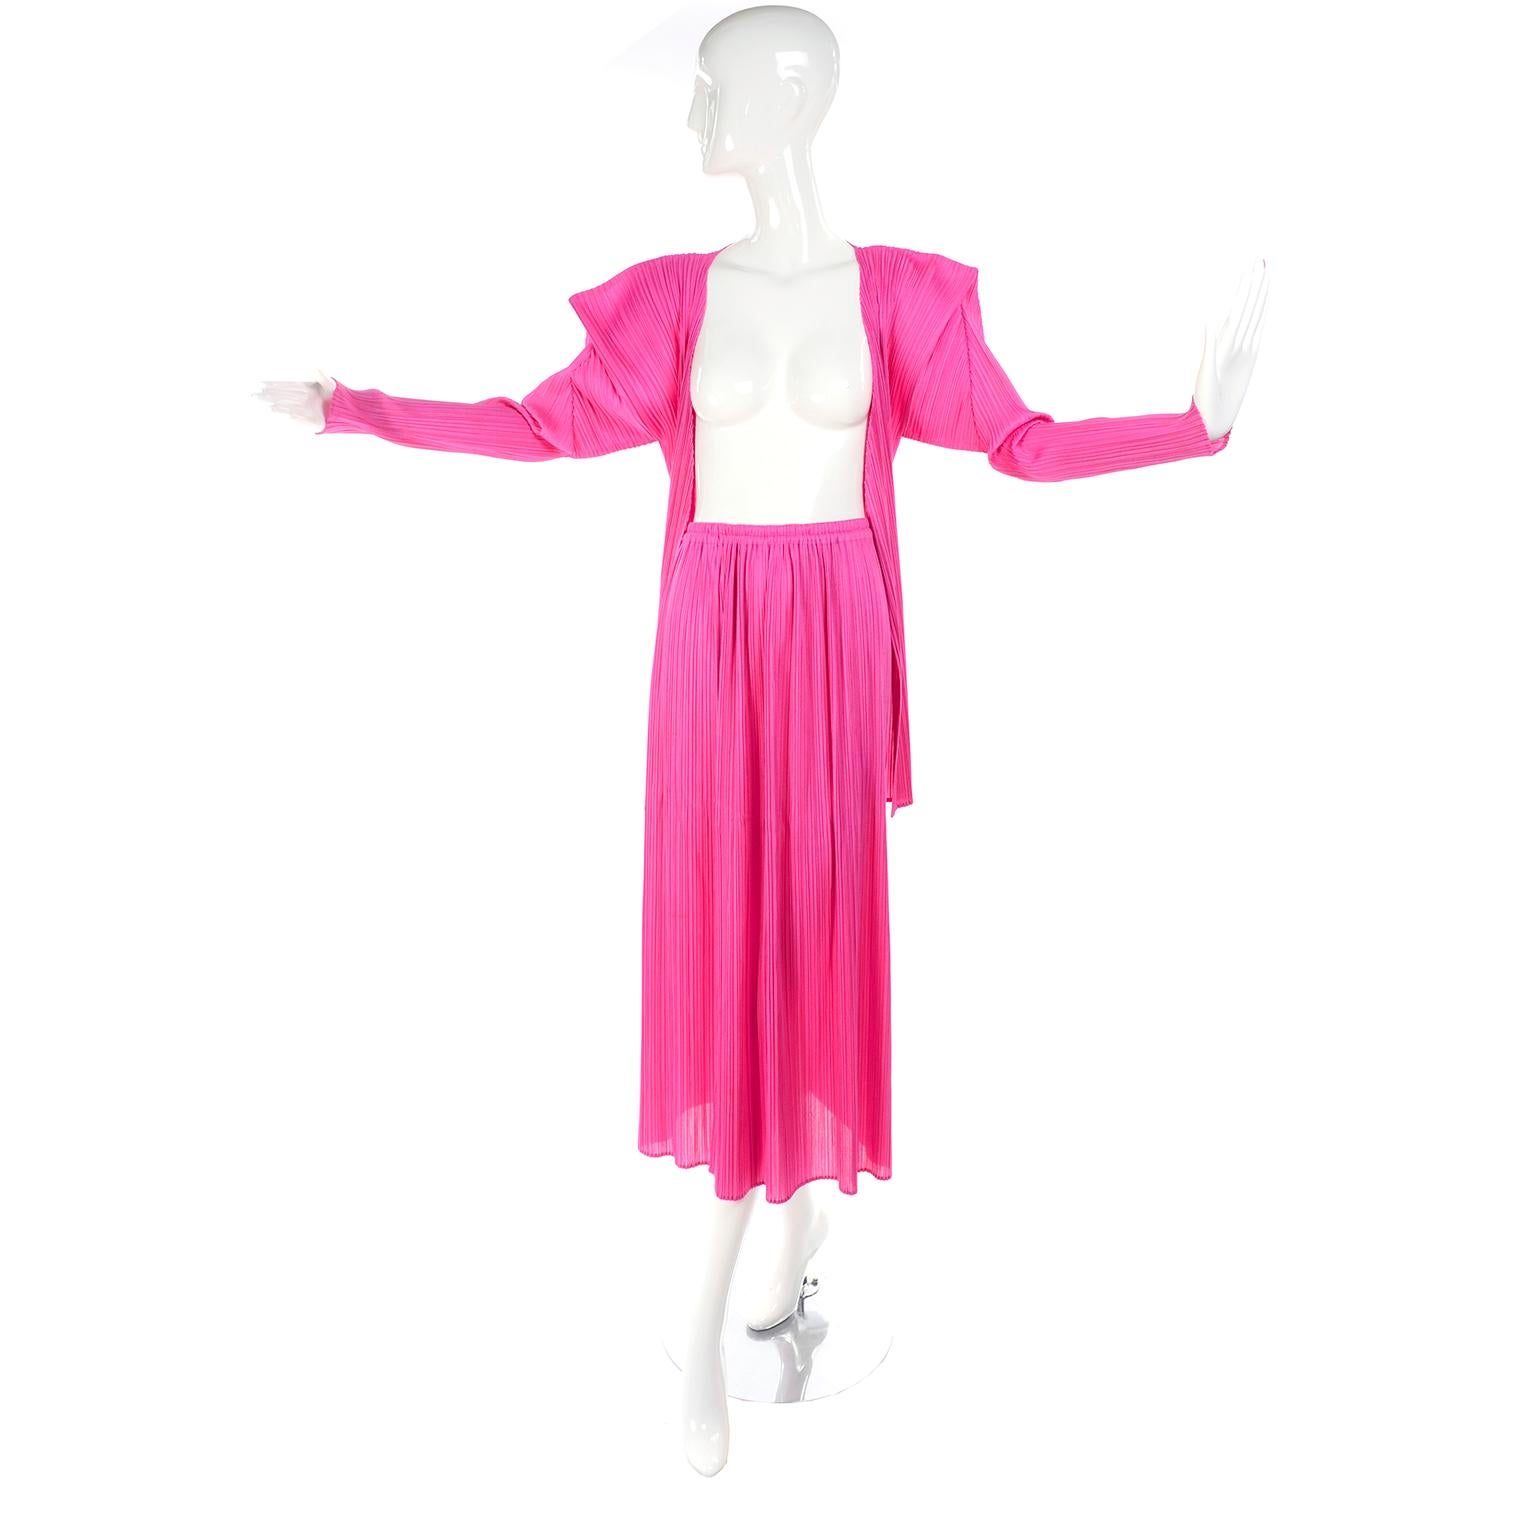 This is a great hot pink pleated Issey Miyake Skirt and top or Cardigan ensemble. This outfit came from an estate we acquired of exceptional avant garde designer clothing and accessories.  The open front cardigan top has asymmetrical structured